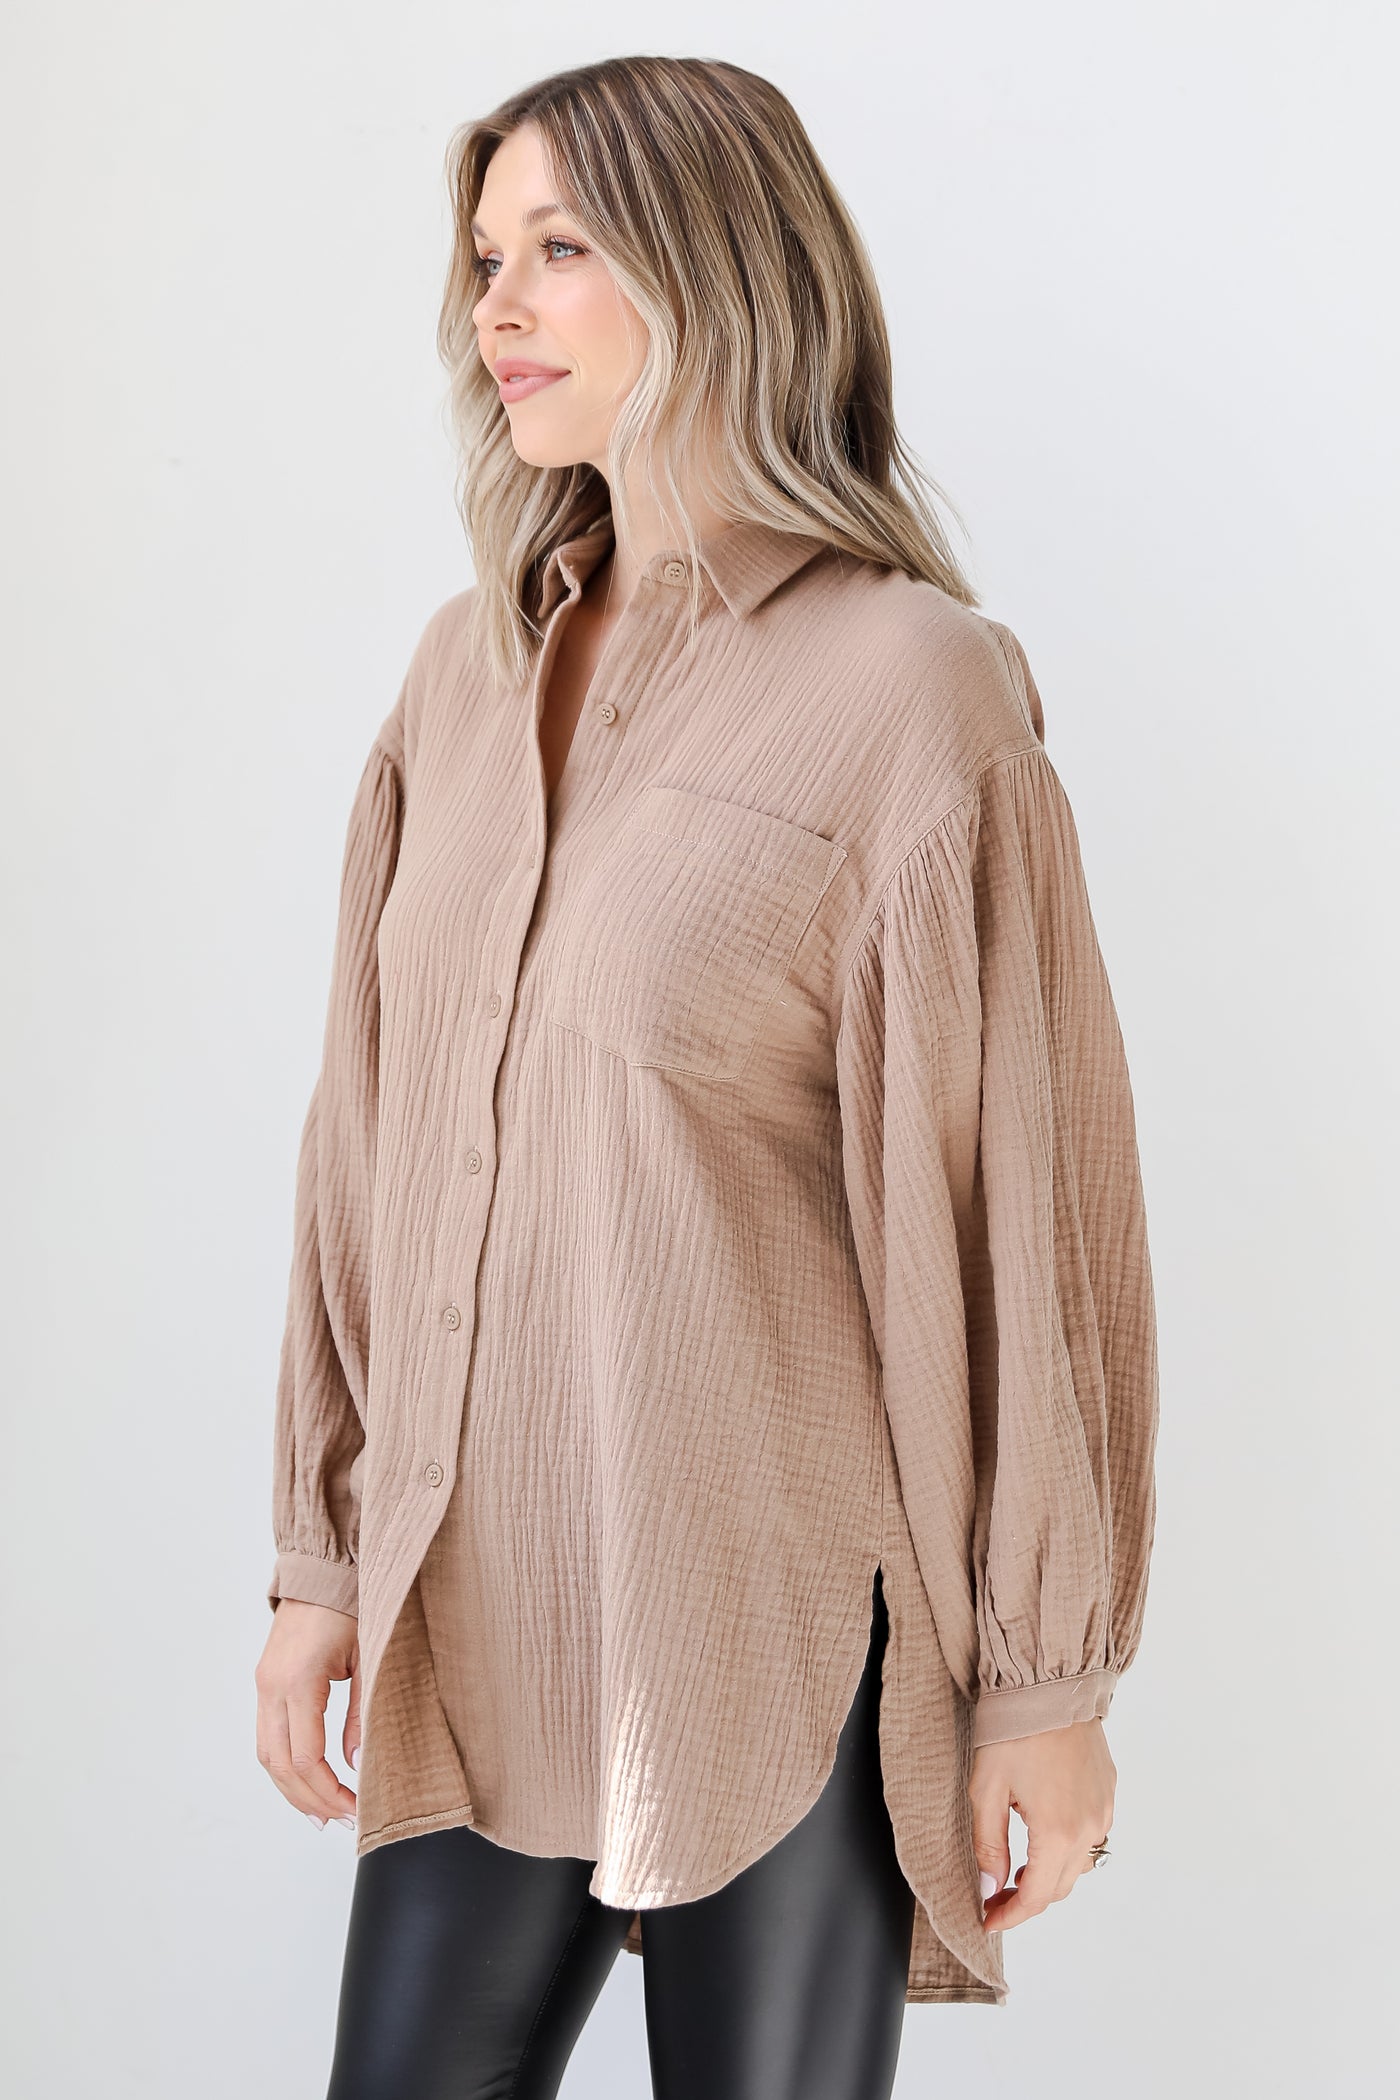 Linen Tunic side view